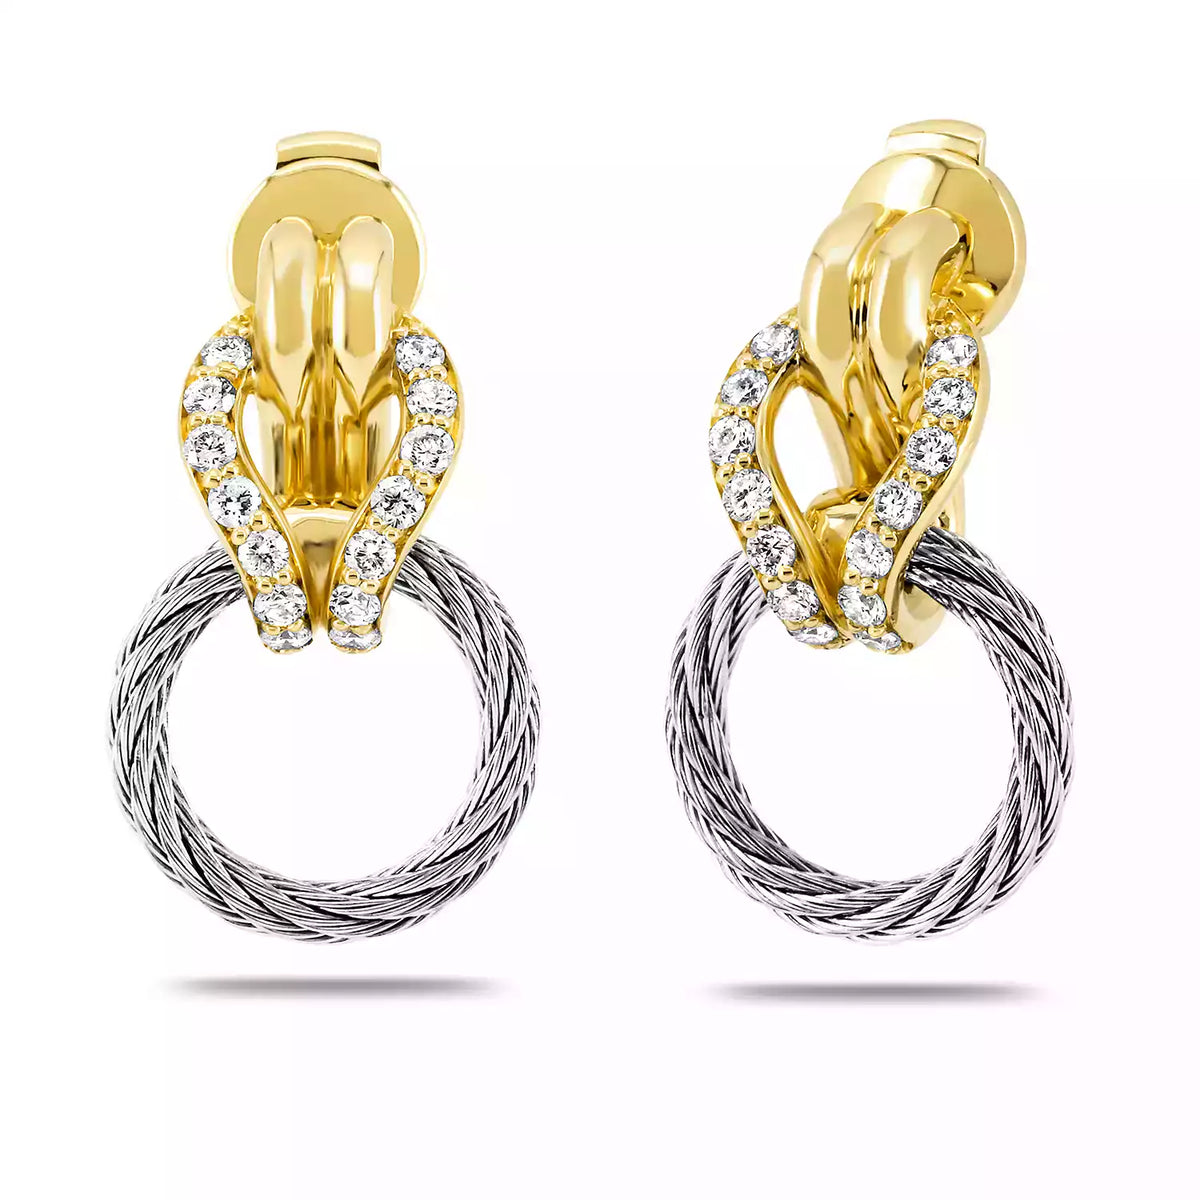 Steel_Gold 18KT with 28 Diamonds 0.42ct